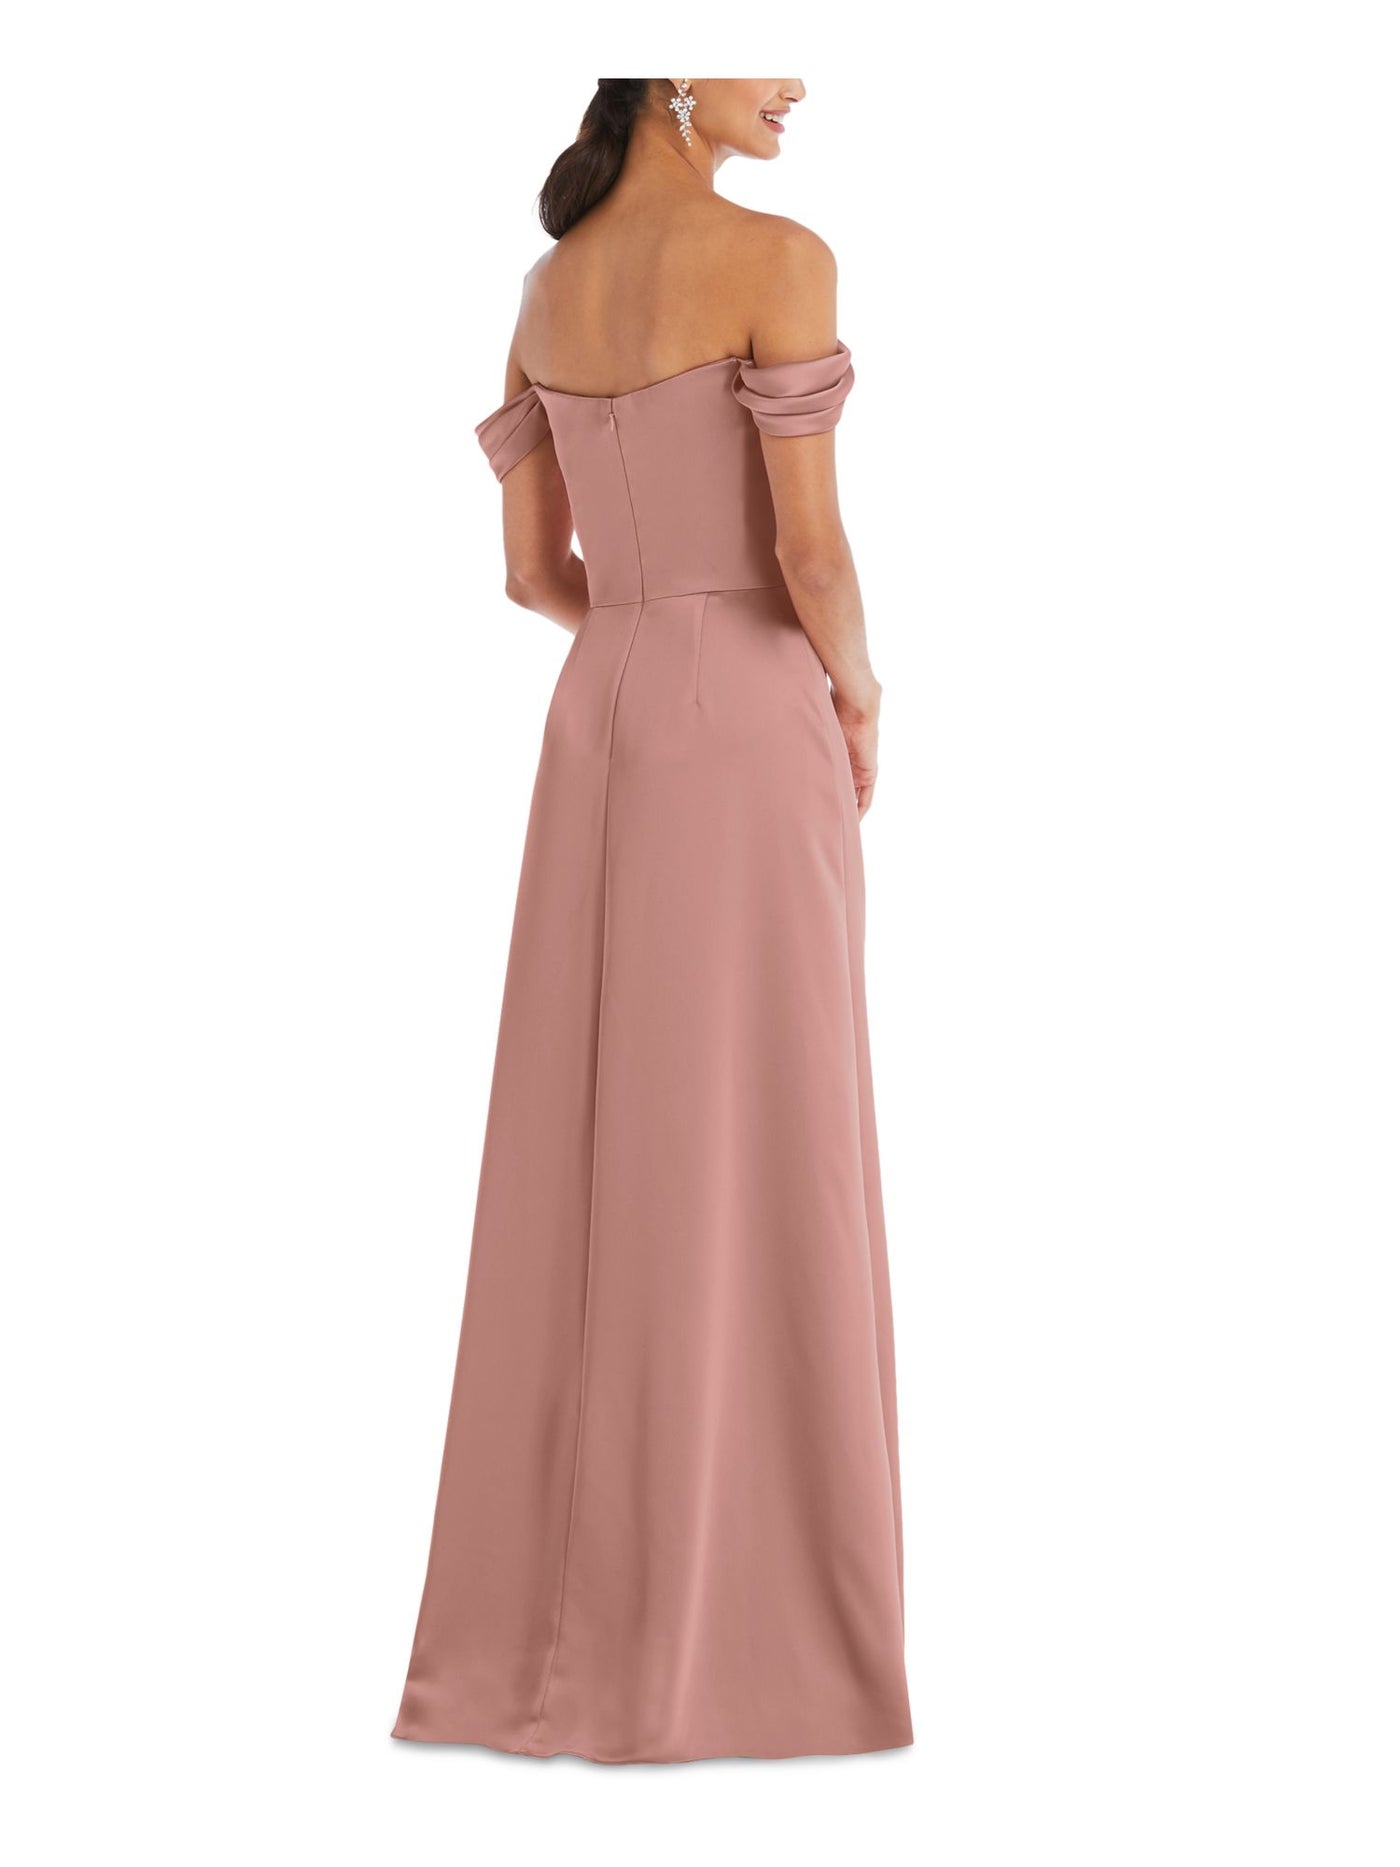 DESSY COLLECTION Womens Pink Zippered Lined Boning Pleated Cap Sleeve Off Shoulder Full-Length Formal Gown Dress 14R